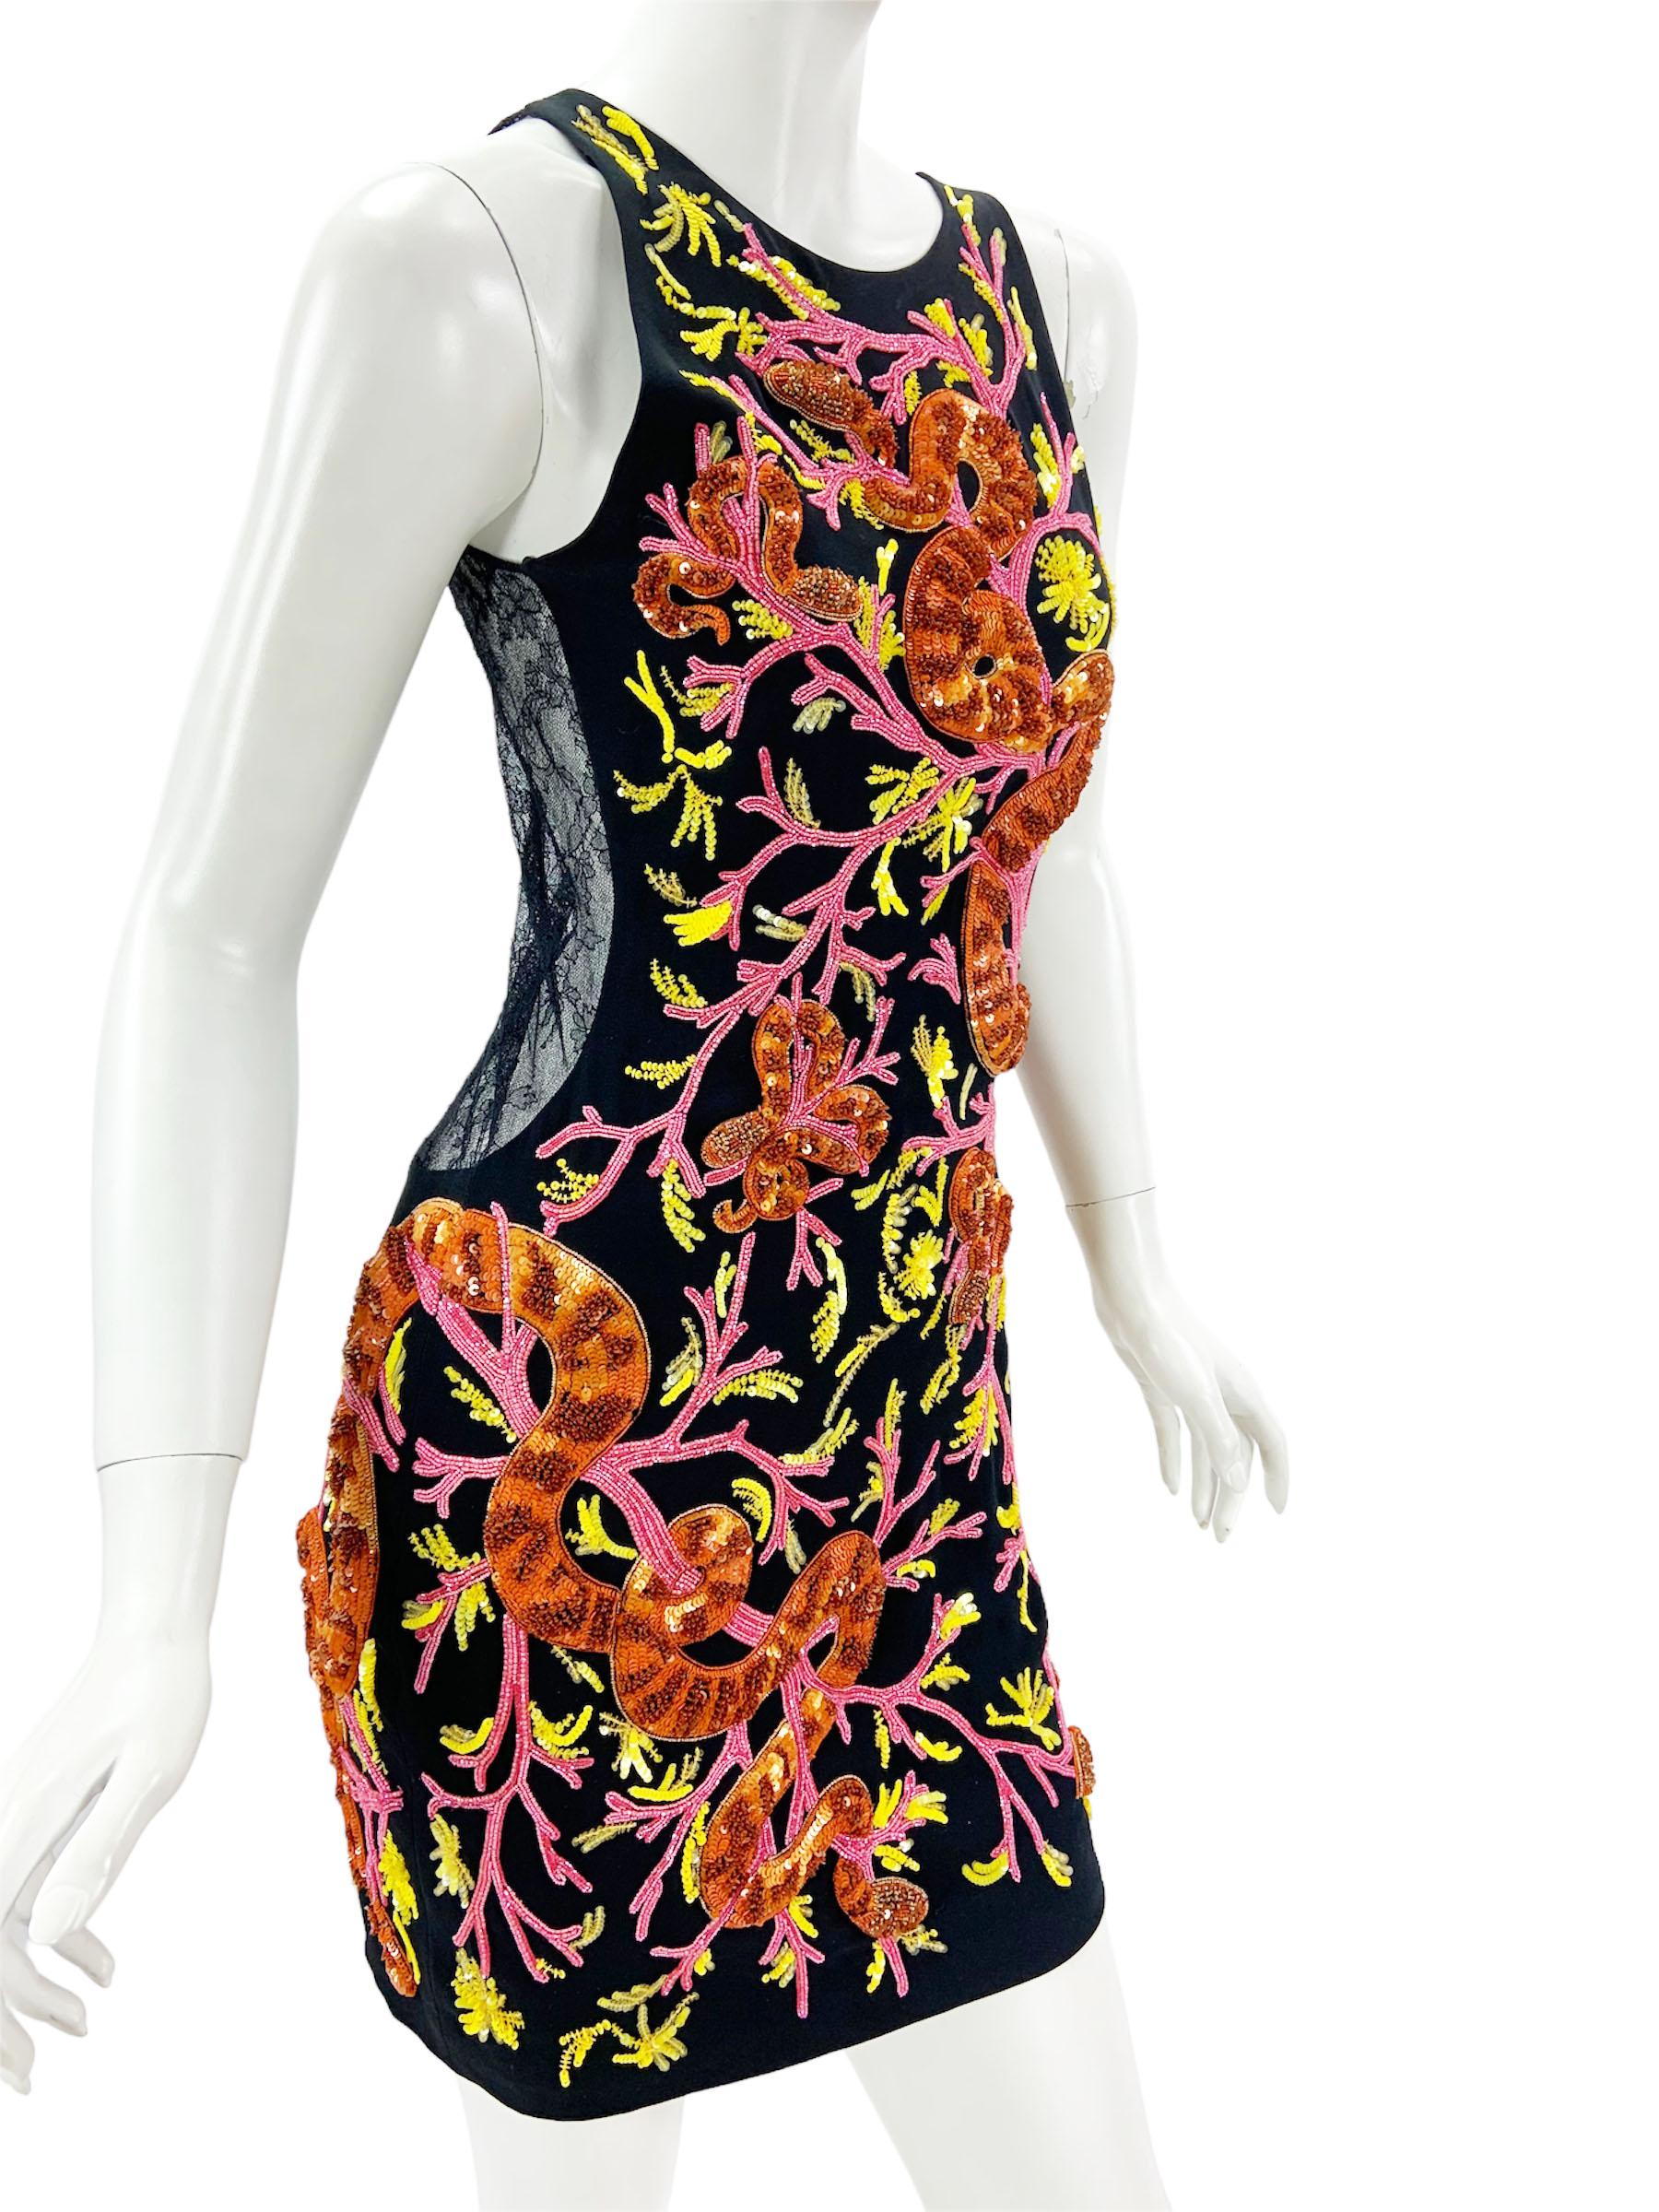 Women's New Roberto Cavalli 3-D Snake Corals Embellished Lace Mini Dress Italian 38, 40 For Sale